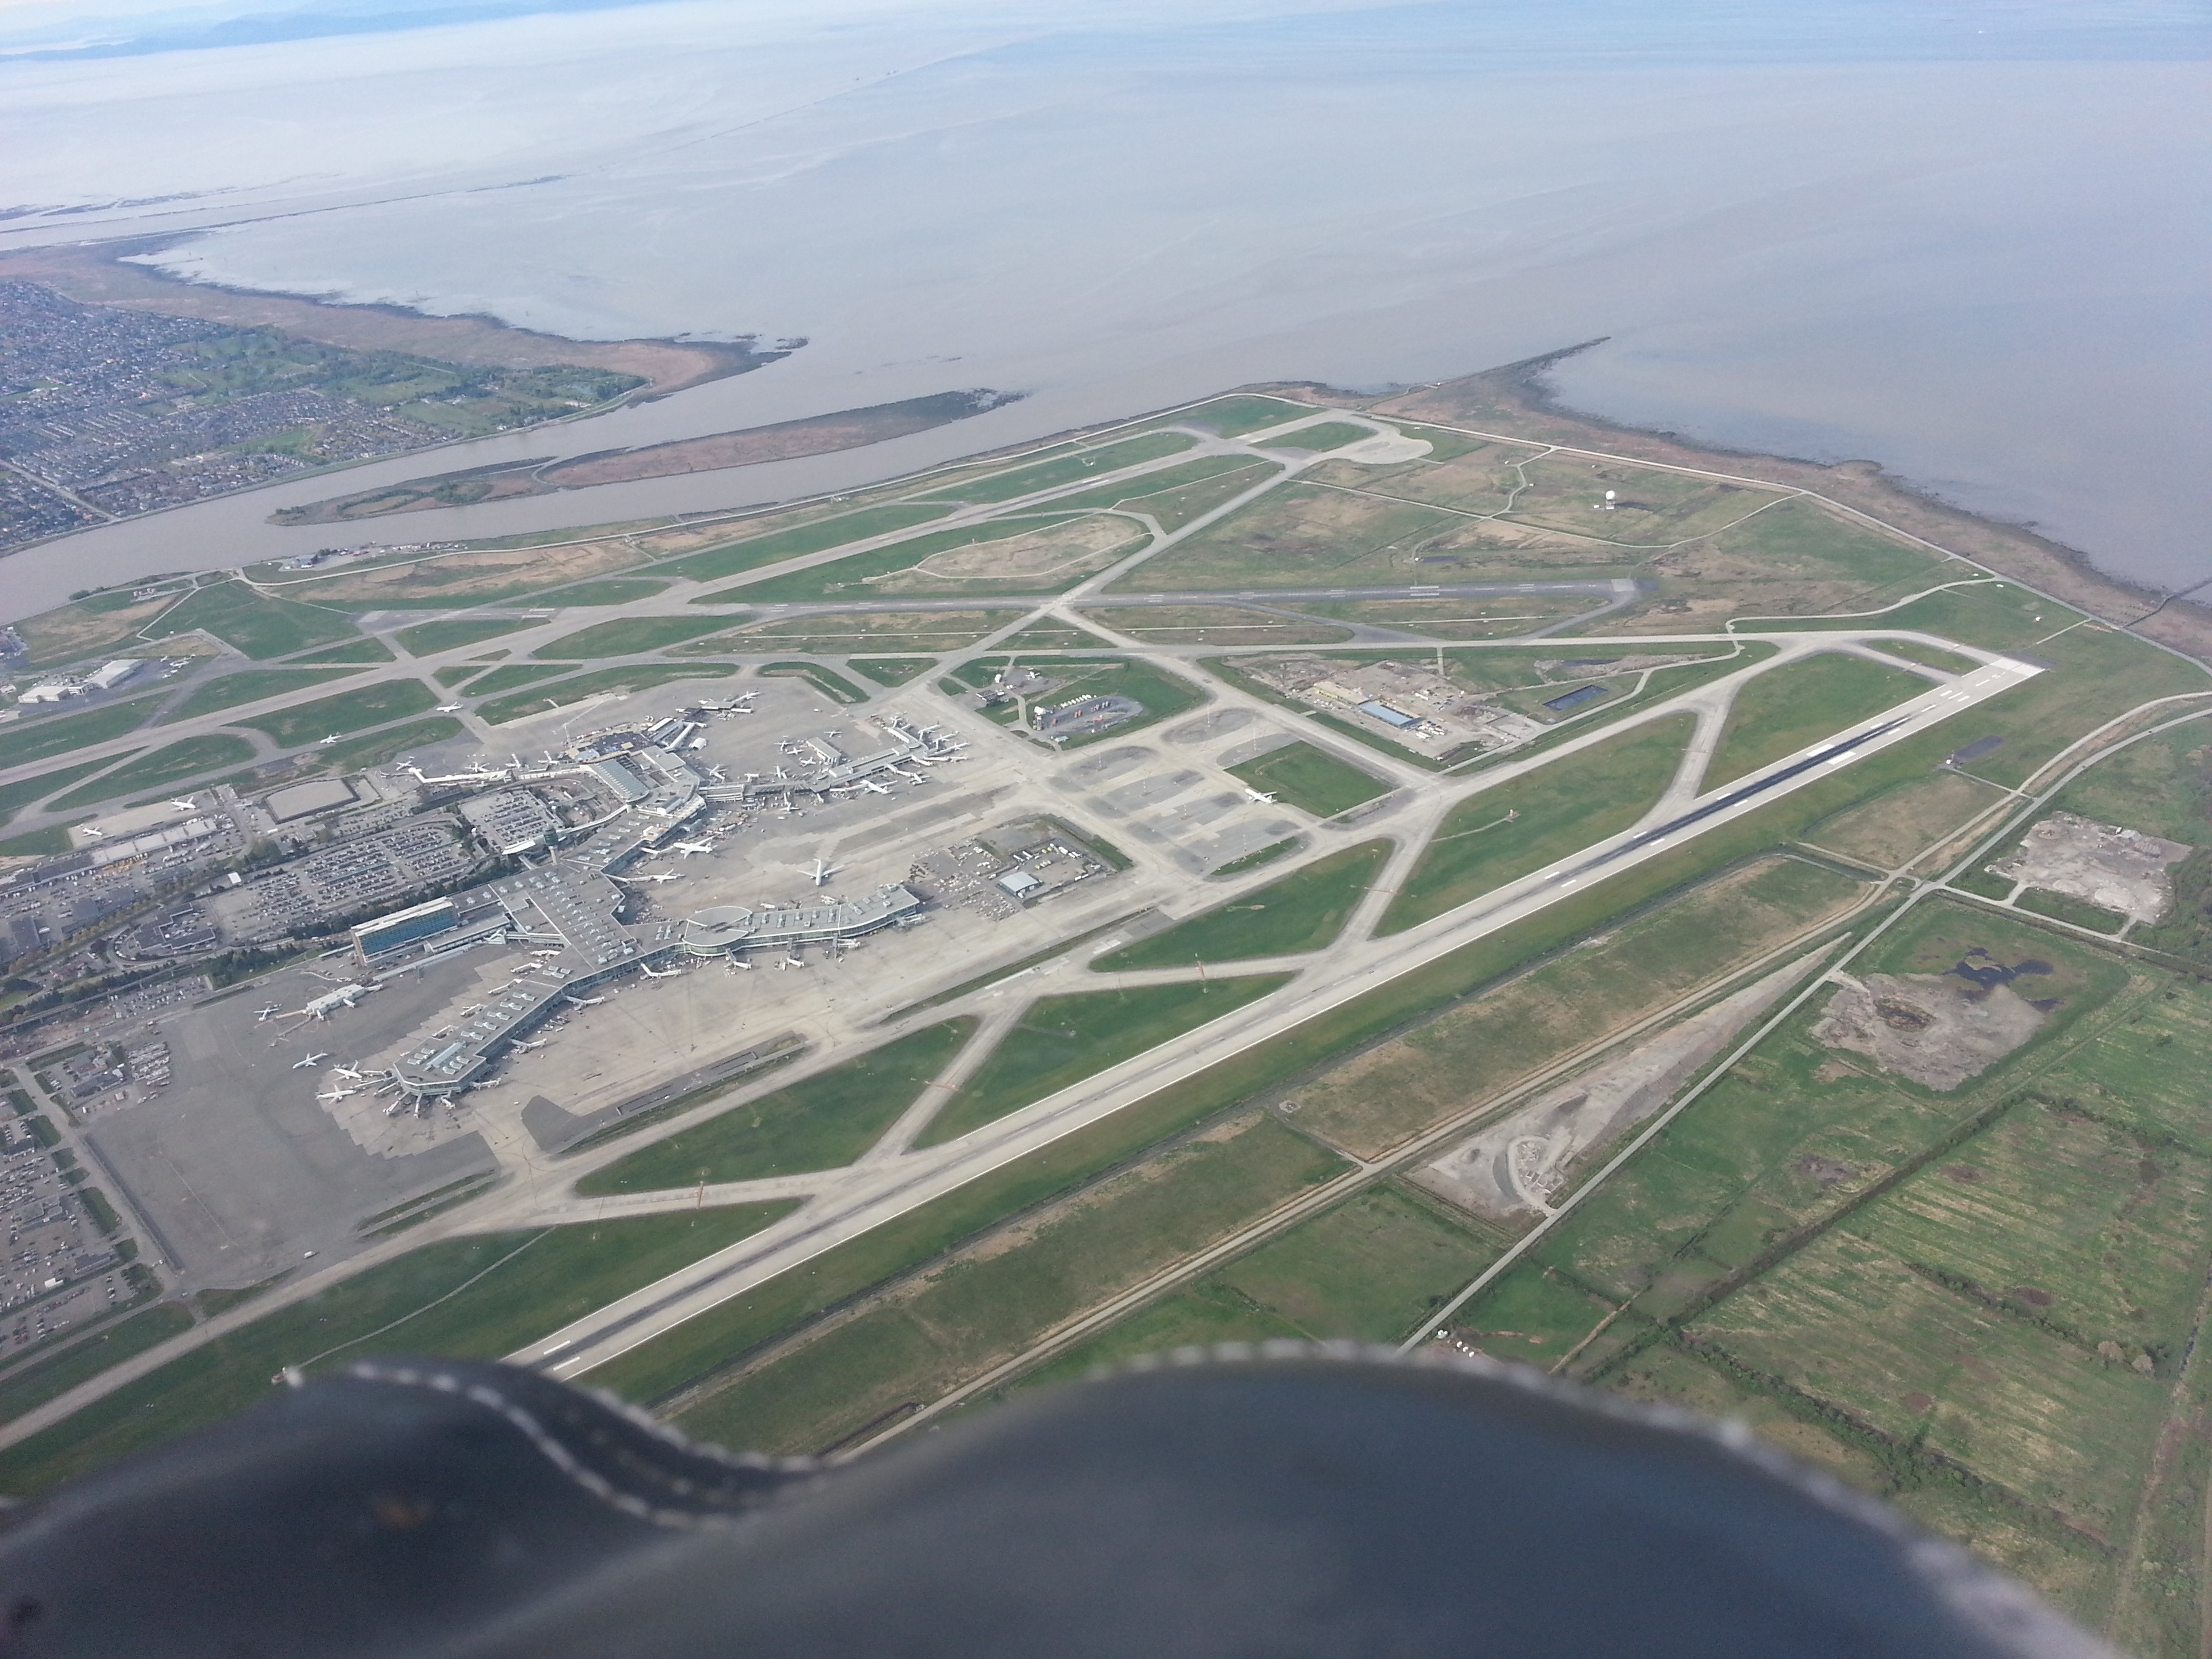 Over top of YVR, vectored to overfly the thresholds of 26L and 26R